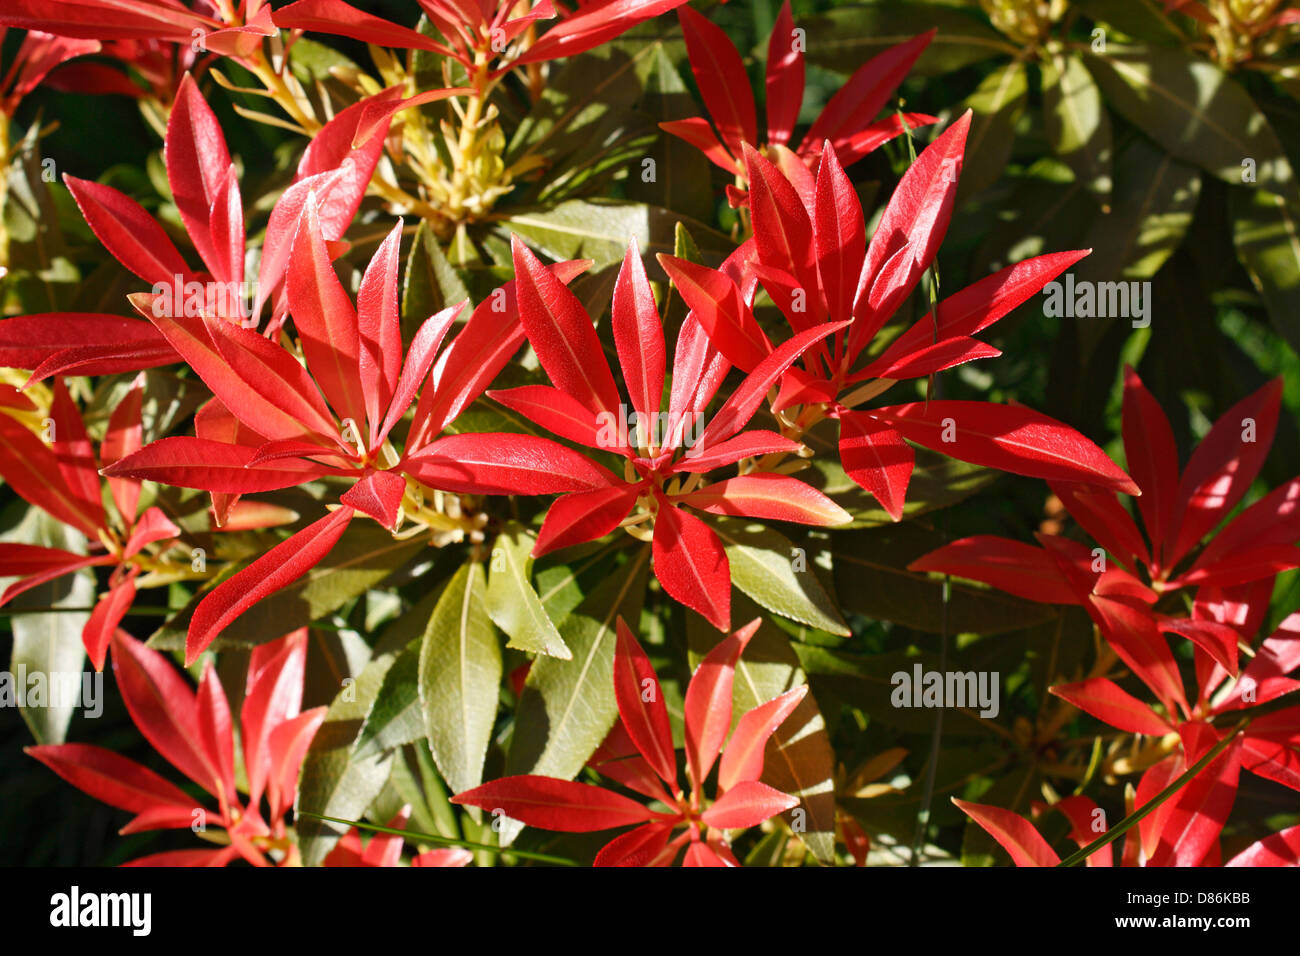 Pieris Japonica an evergreen shrub plant with decorative red leaves foliage Stock Photo